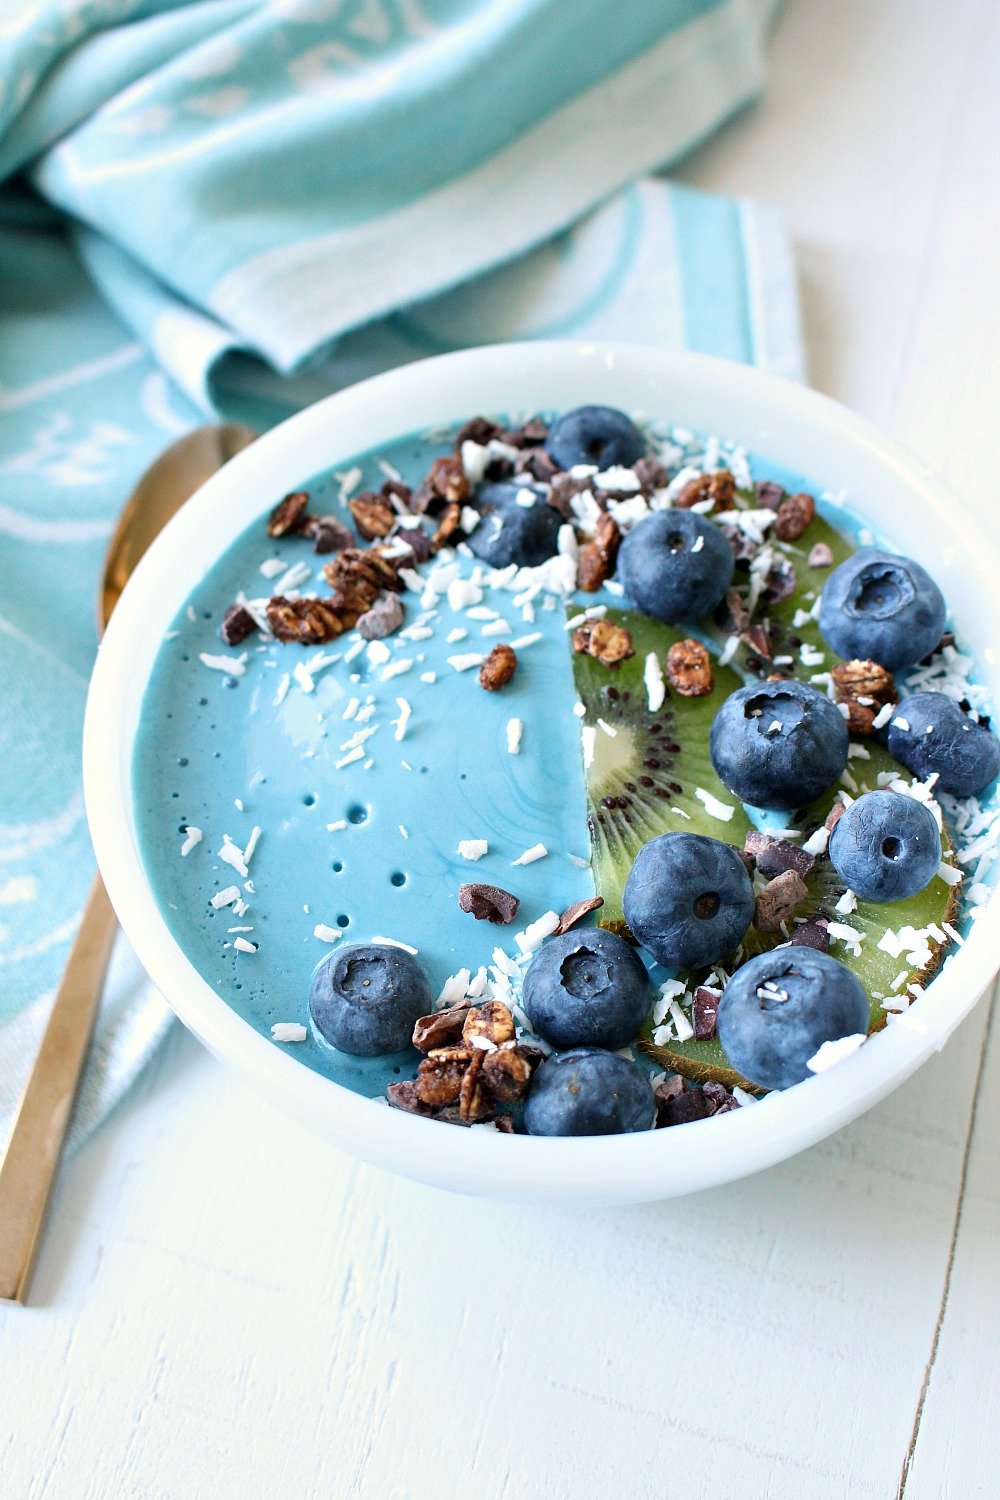 How to Make A Naturally Turquoise Smoothie Bowl